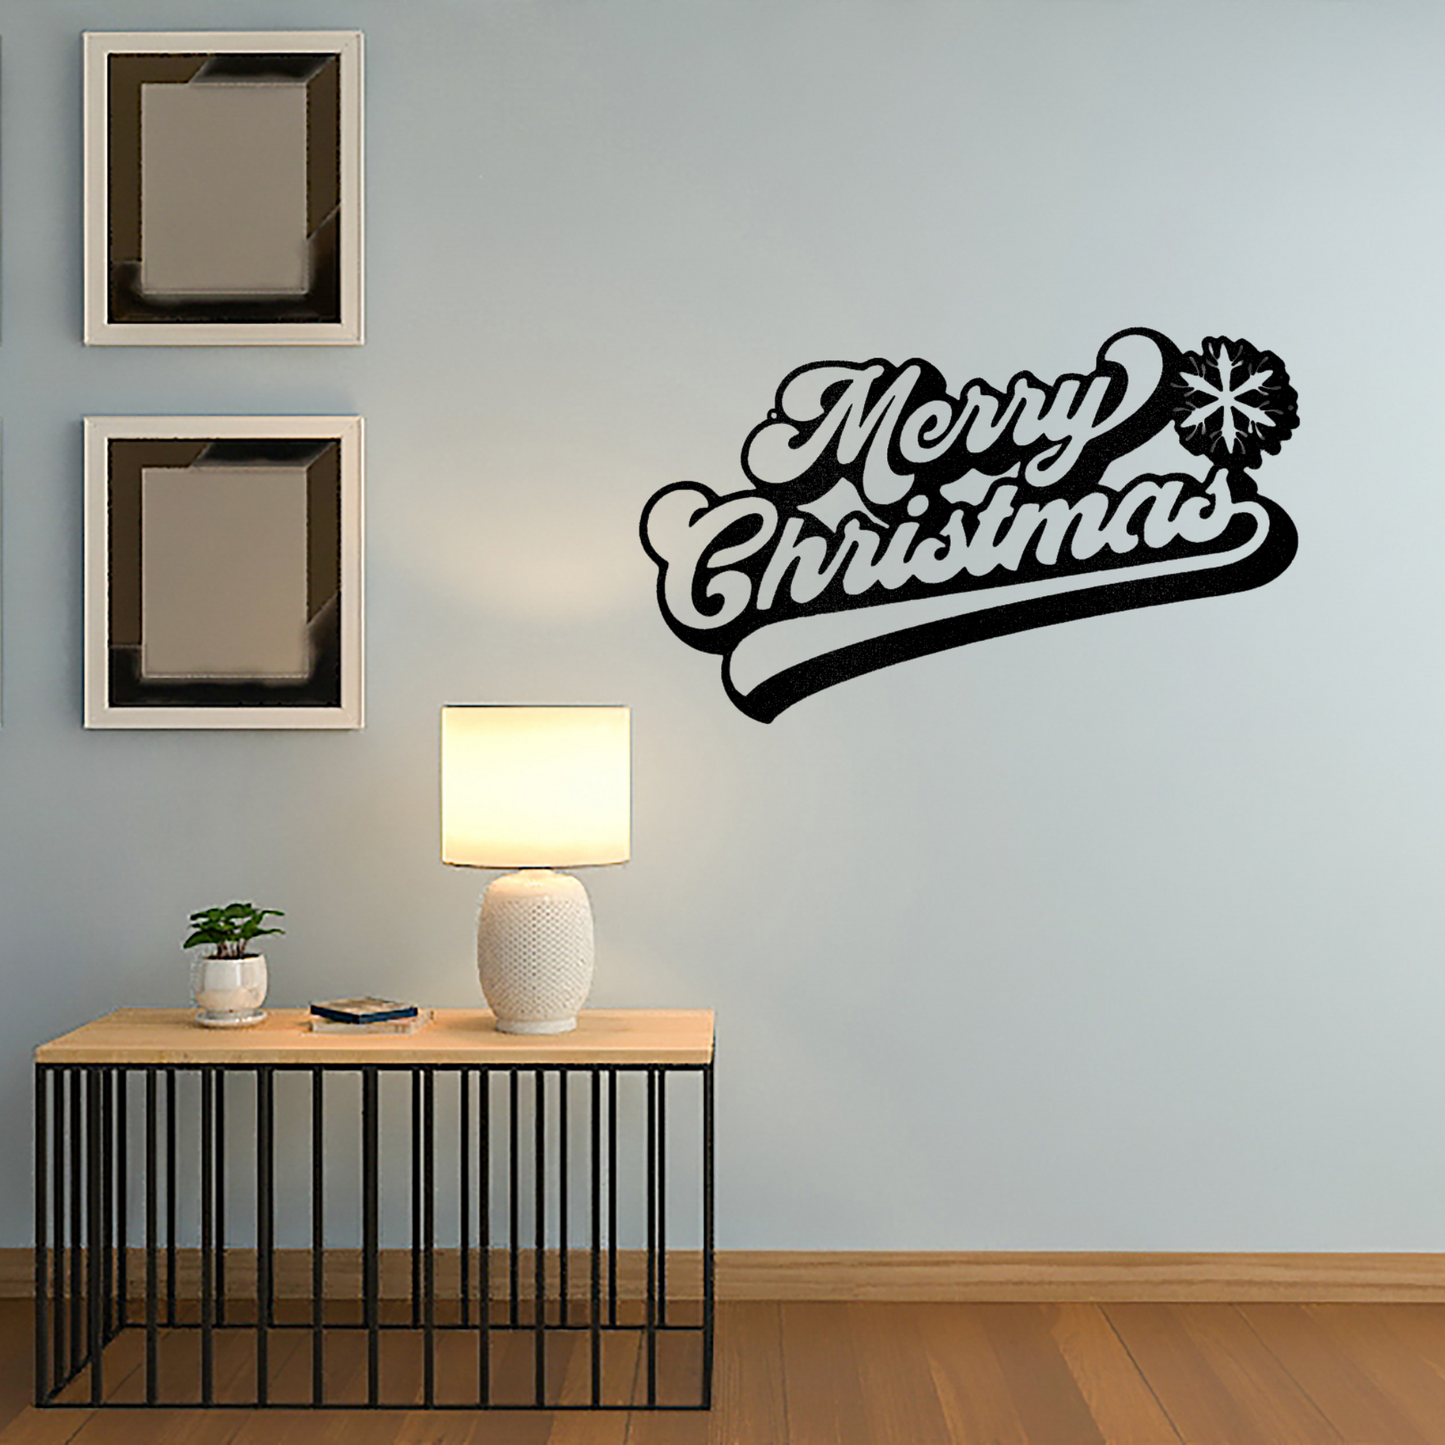 Merry Christmas Quote - Steel Sign, House Decor, Wall Art, Metal Signs, Metal Decorative Sign, Metal Monogram, Dining Room Wall Decor